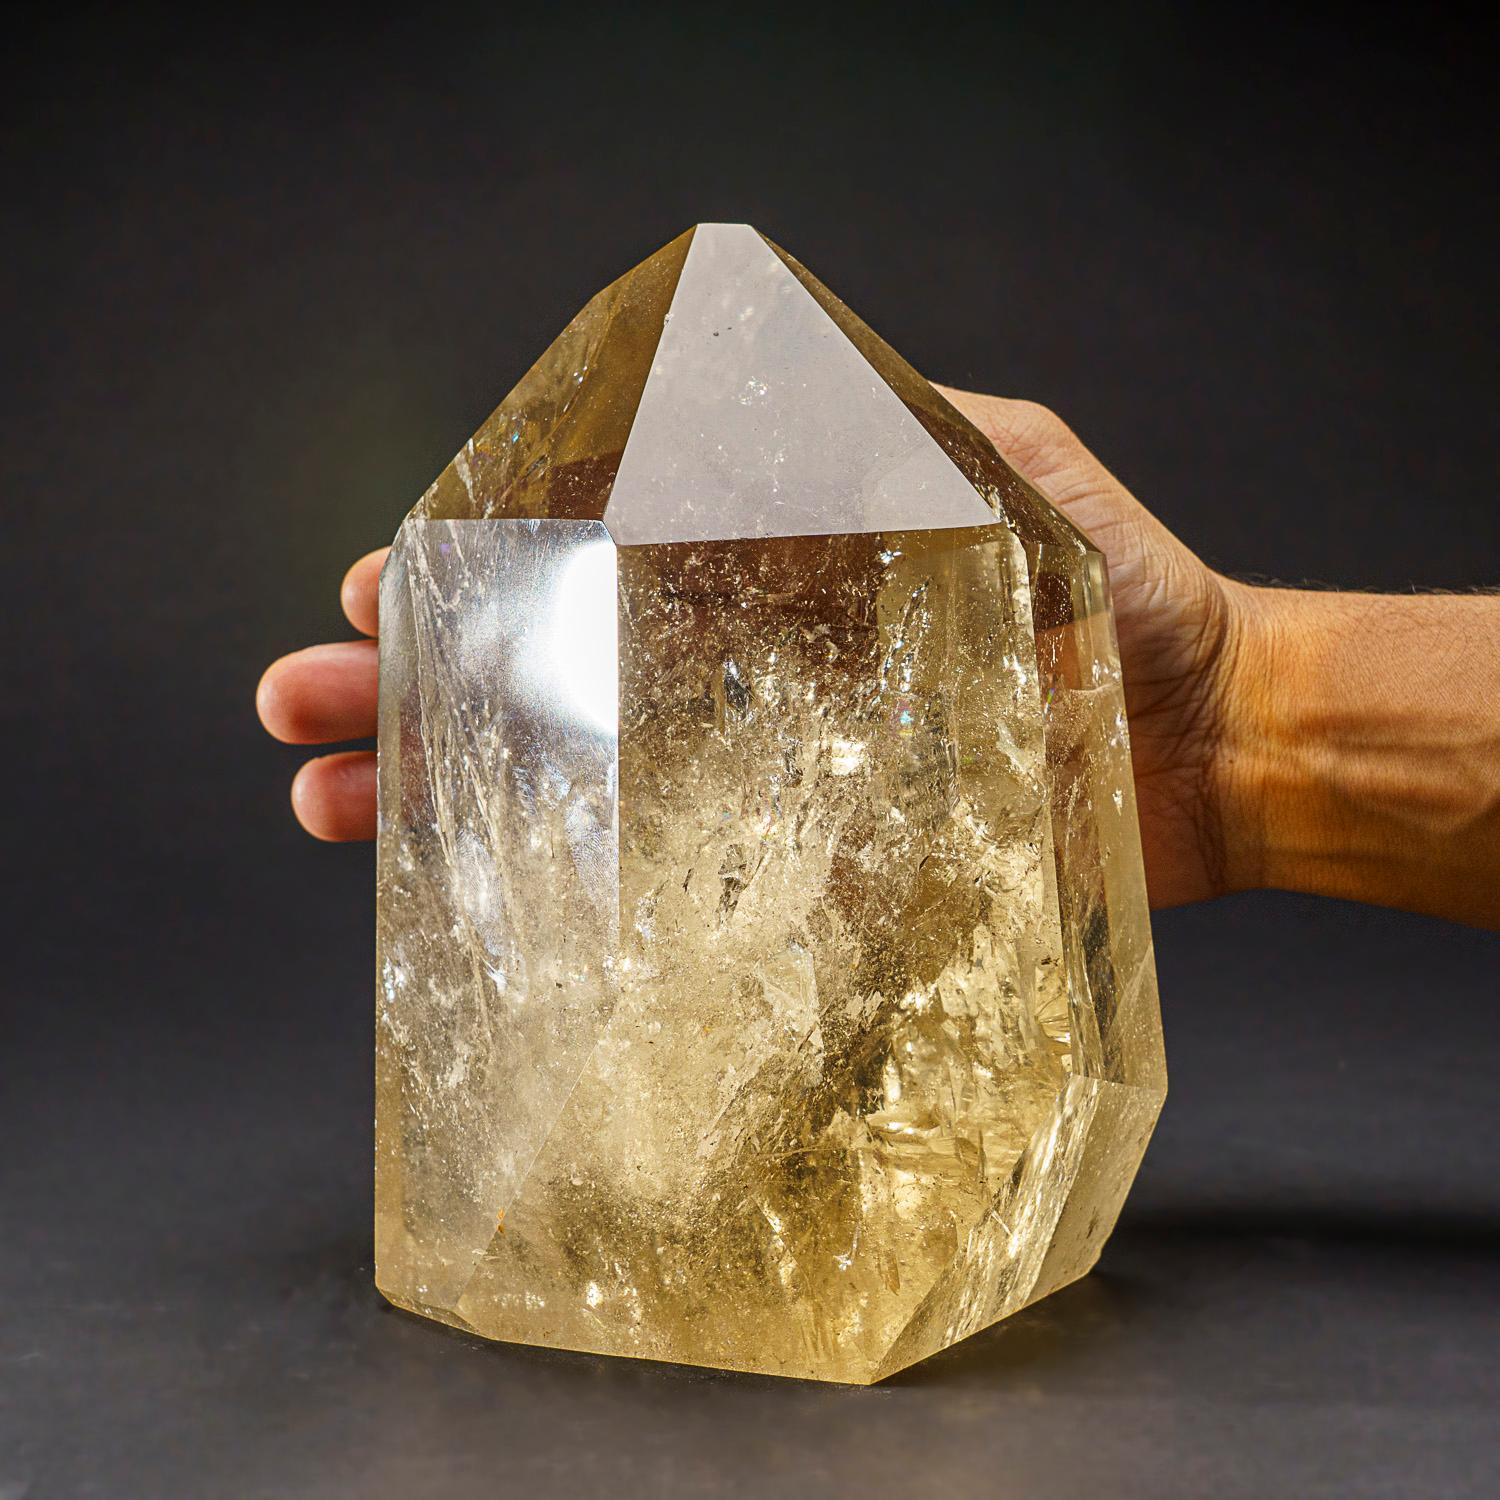 Museum-quality, large crystal of transparent Citrine quartz point with perfectly terminated faces. This world-class point is extremely large, with top luster and excellent natural smoky yellow color, internally this crystal is flawless.

Citrine can